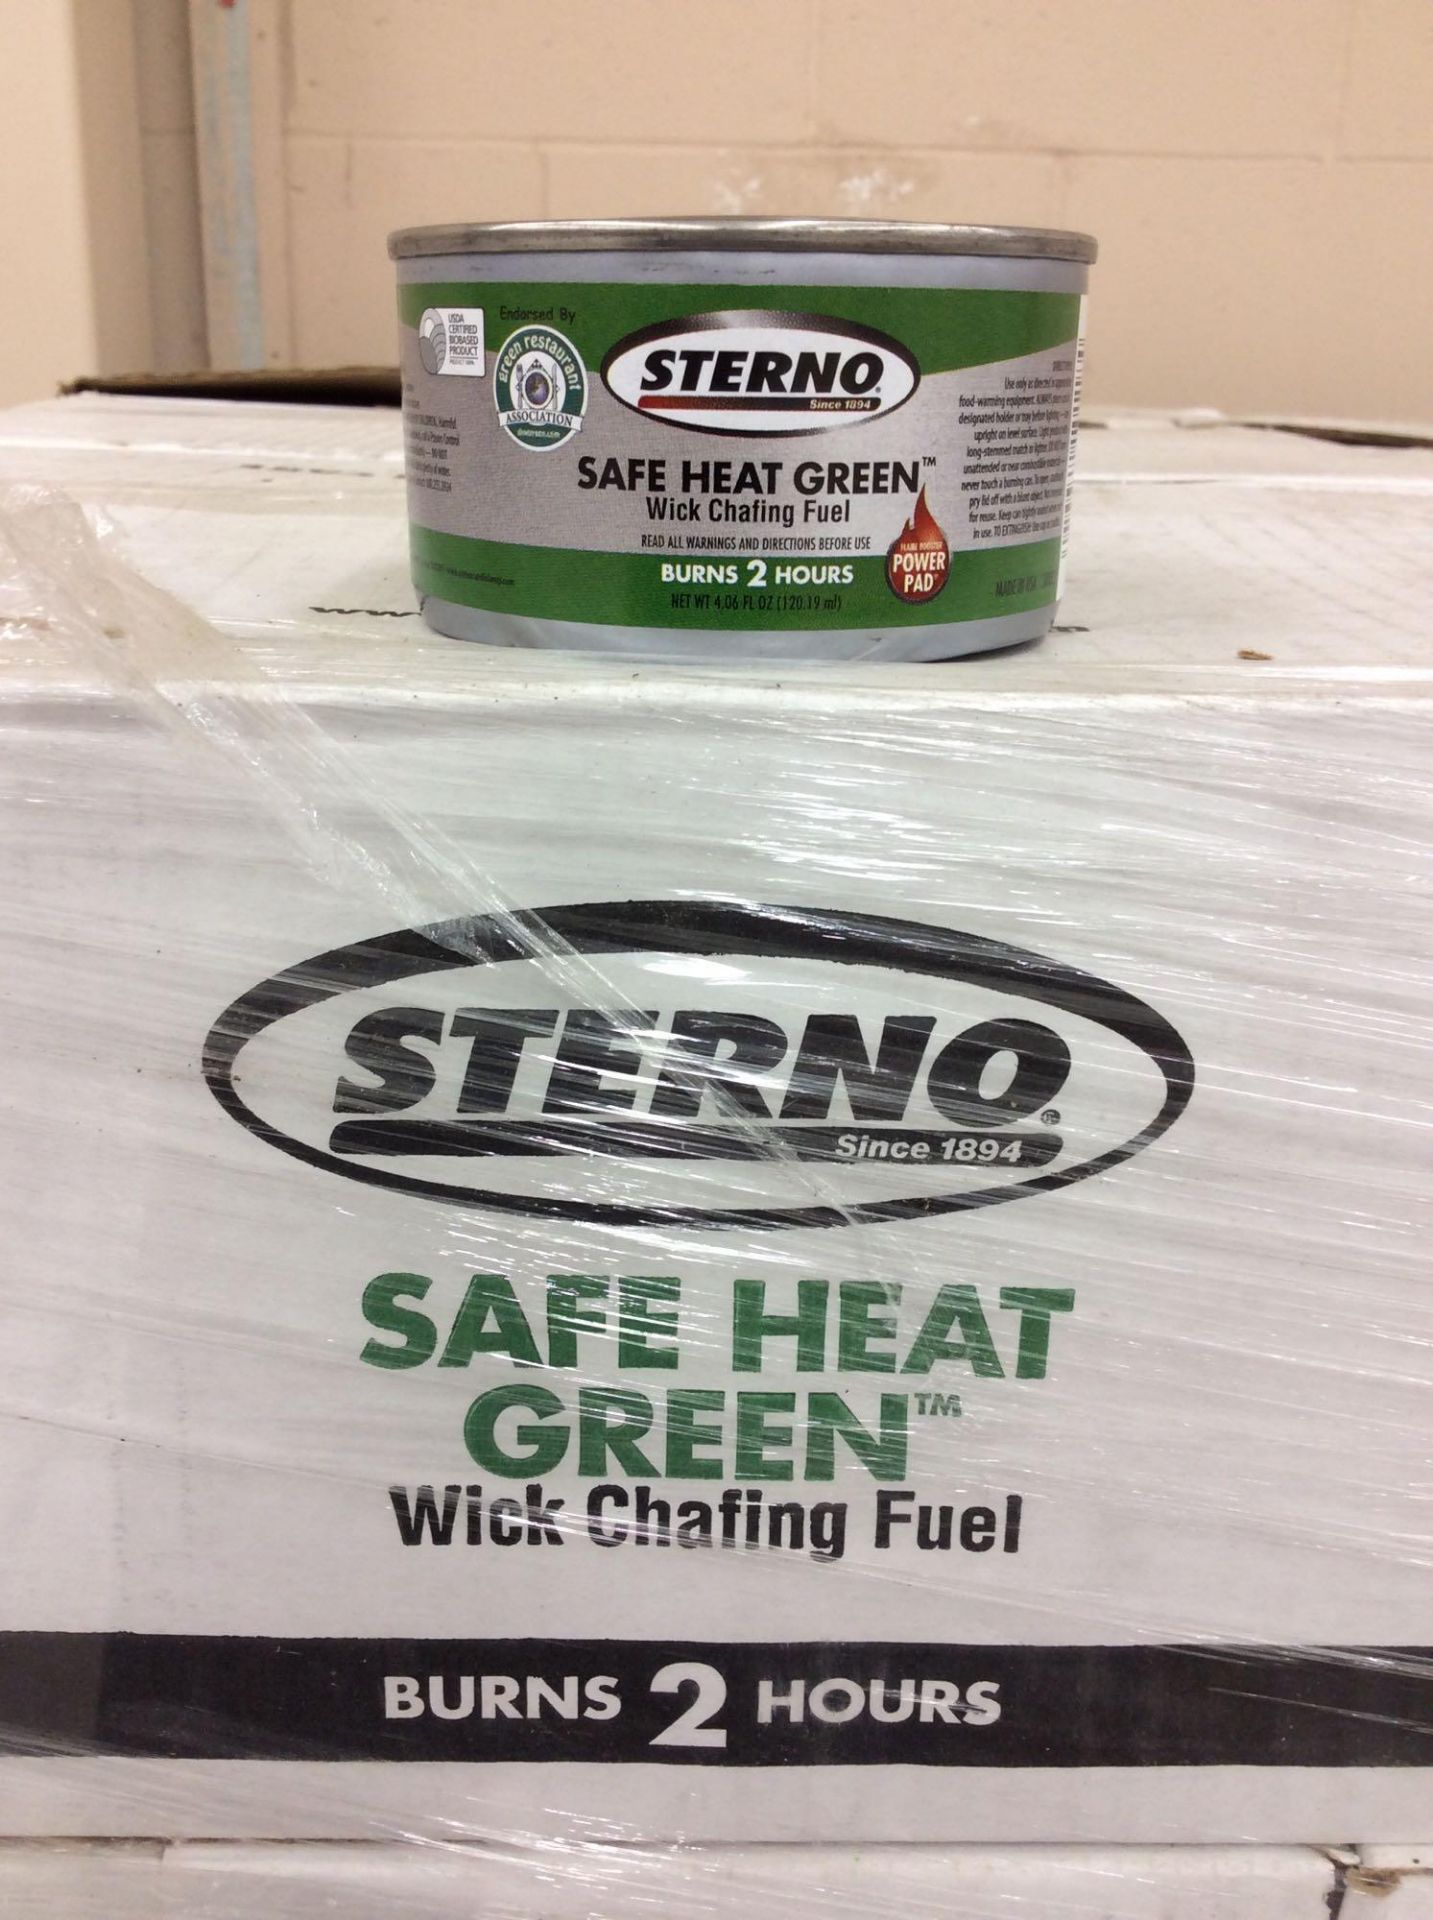 Lot of (63) cases of Sterno Safe Green Heat Wick Chafing Fuel, 2-hr, 4.06-oz, (72) cans per case